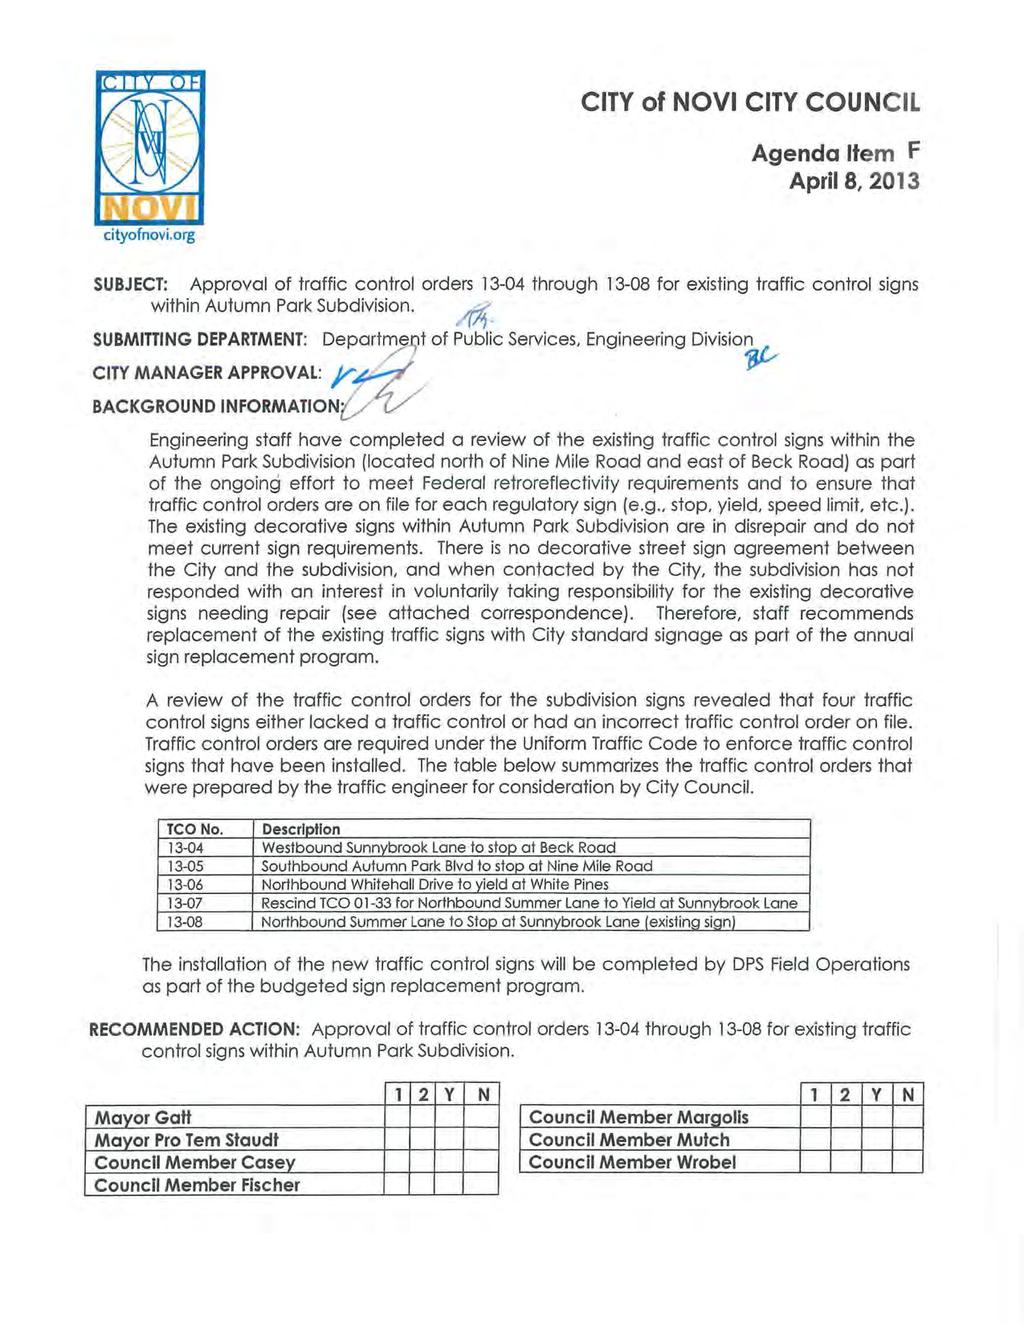 CITY of NOVI CITY COUNCIL Agenda Item F April 8, 2013 SUBJECT: Approval of traffic control orders 13-04 through 13-08 for existing traffic control signs within Autumn Park Subdivision.